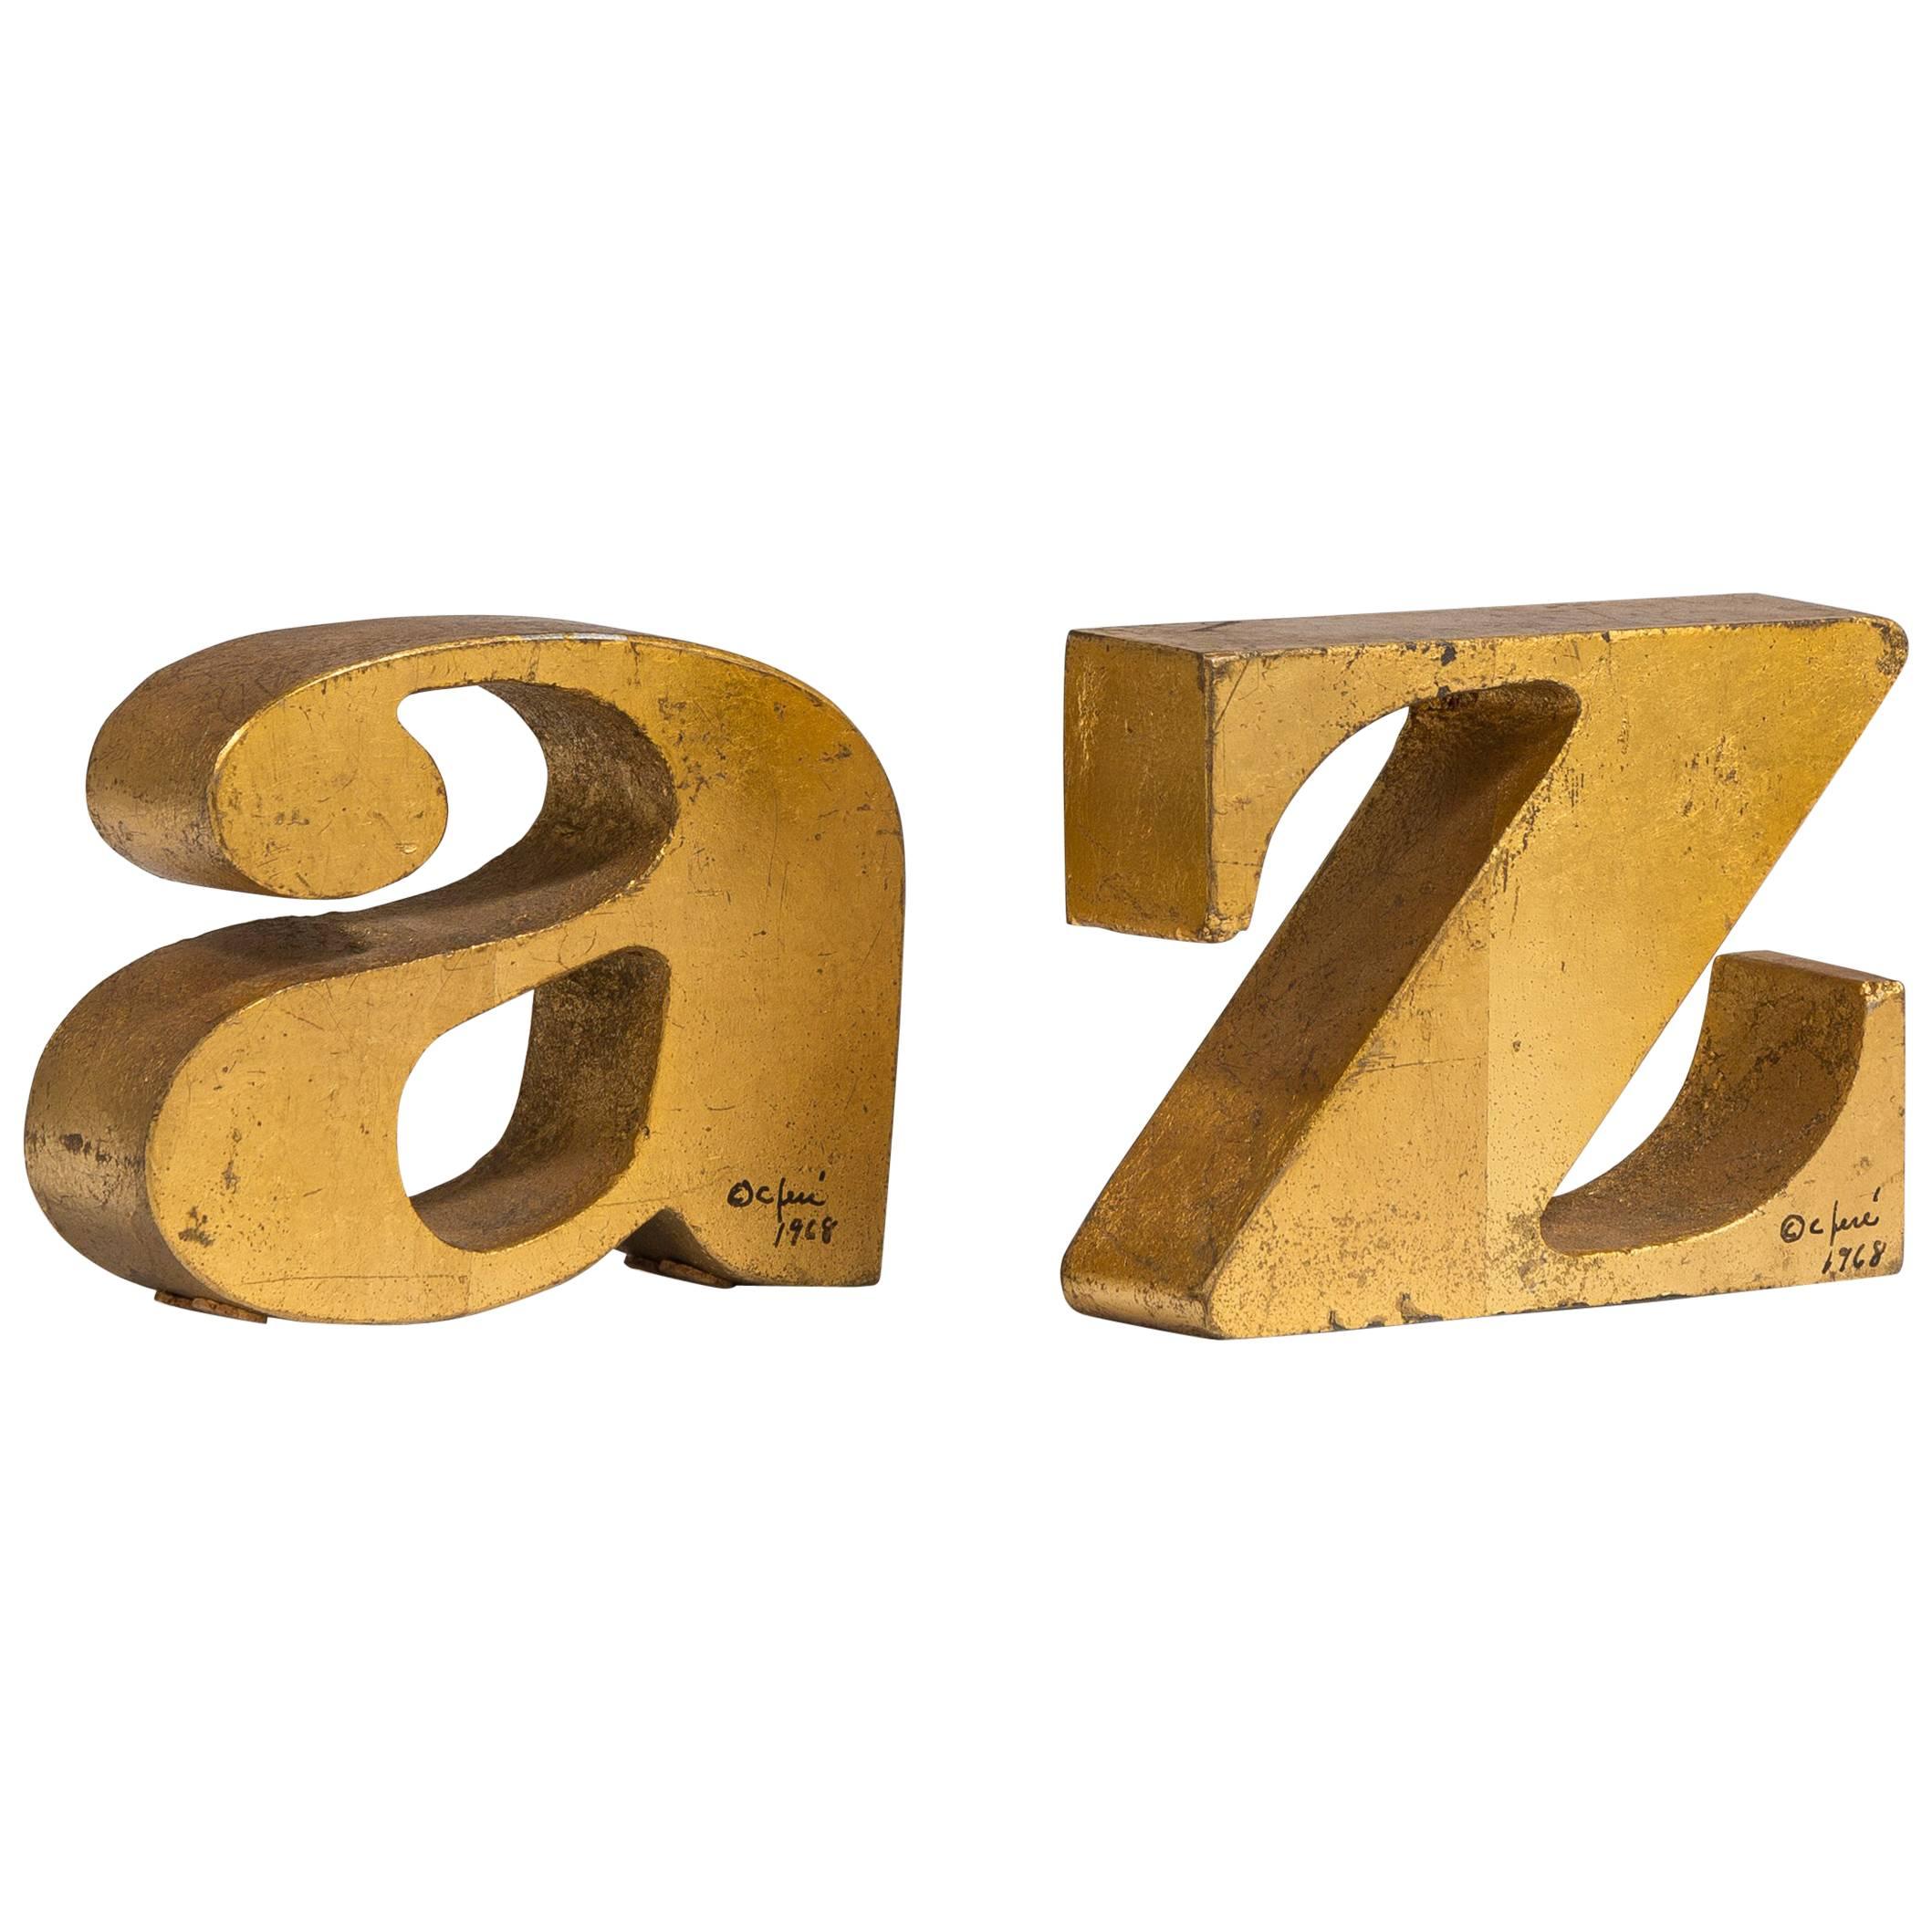 Rare Pair of A-Z Gilded Bookends by Curtis Jere, Signed 1968 For Sale